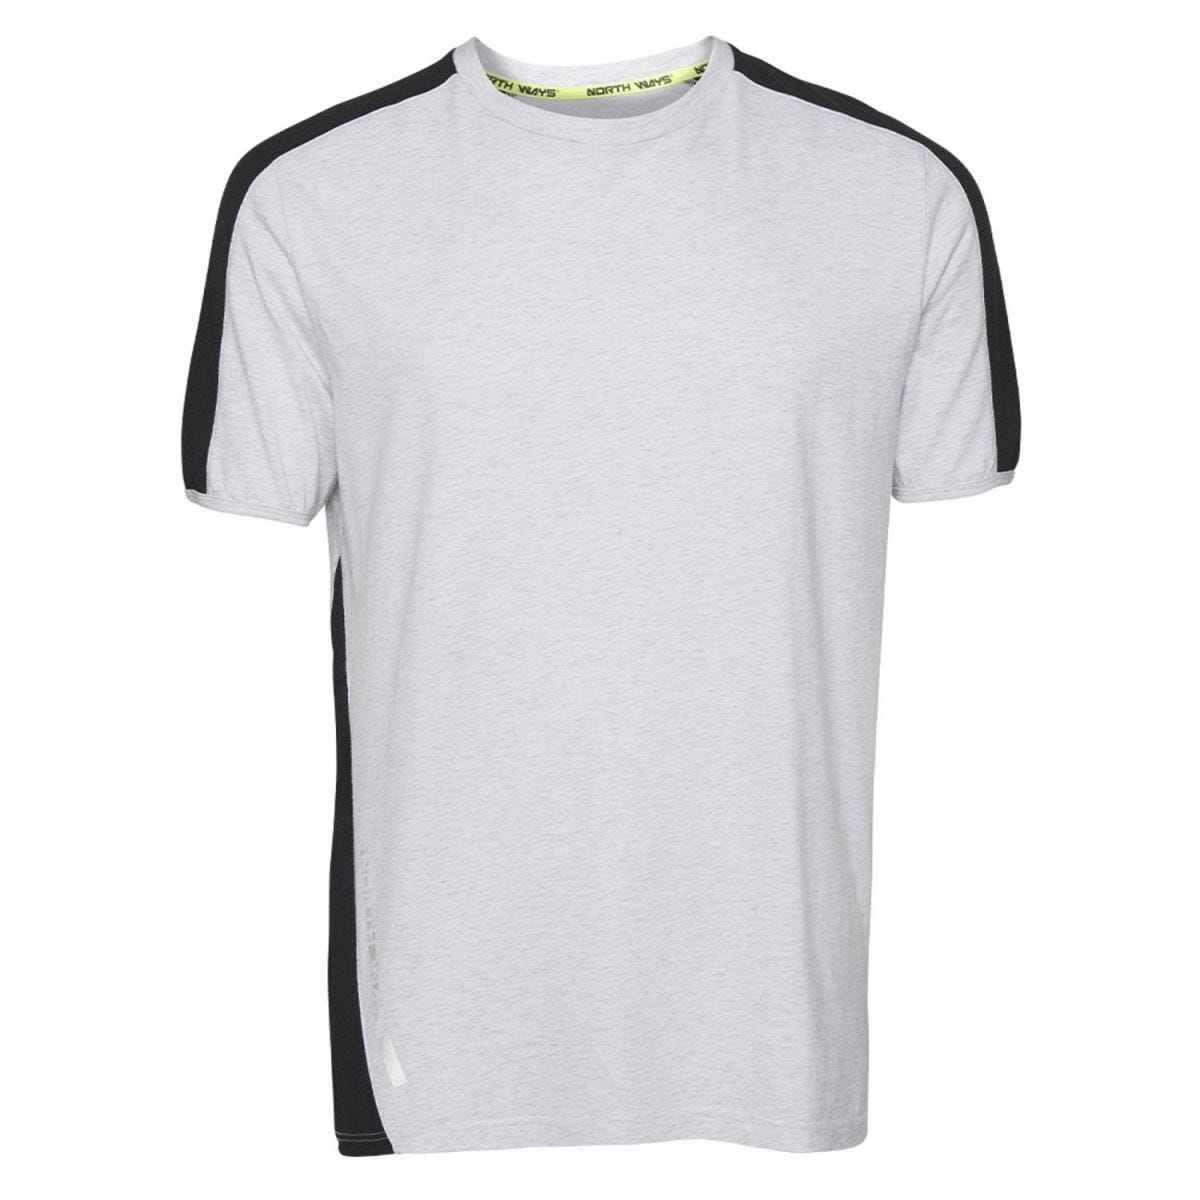 Tee-shirt à manches courtes pour homme Andy blanc chiné - North Ways - Taille XL 0